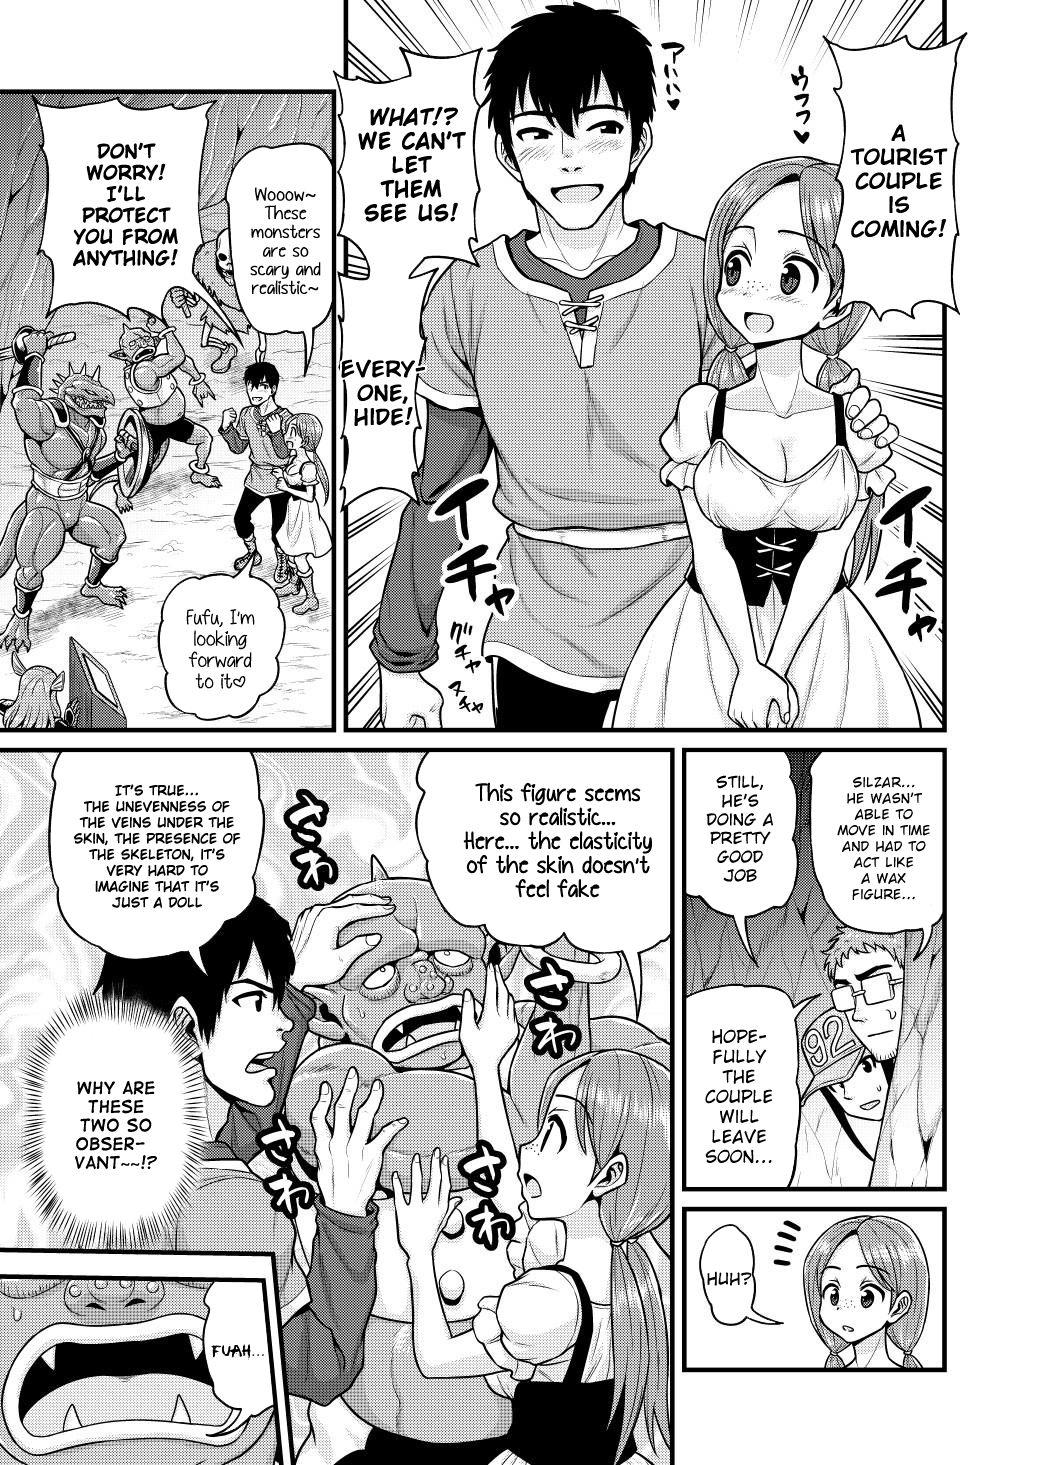 Filming Adult Videos in Another World - Chapter 5 Page 16